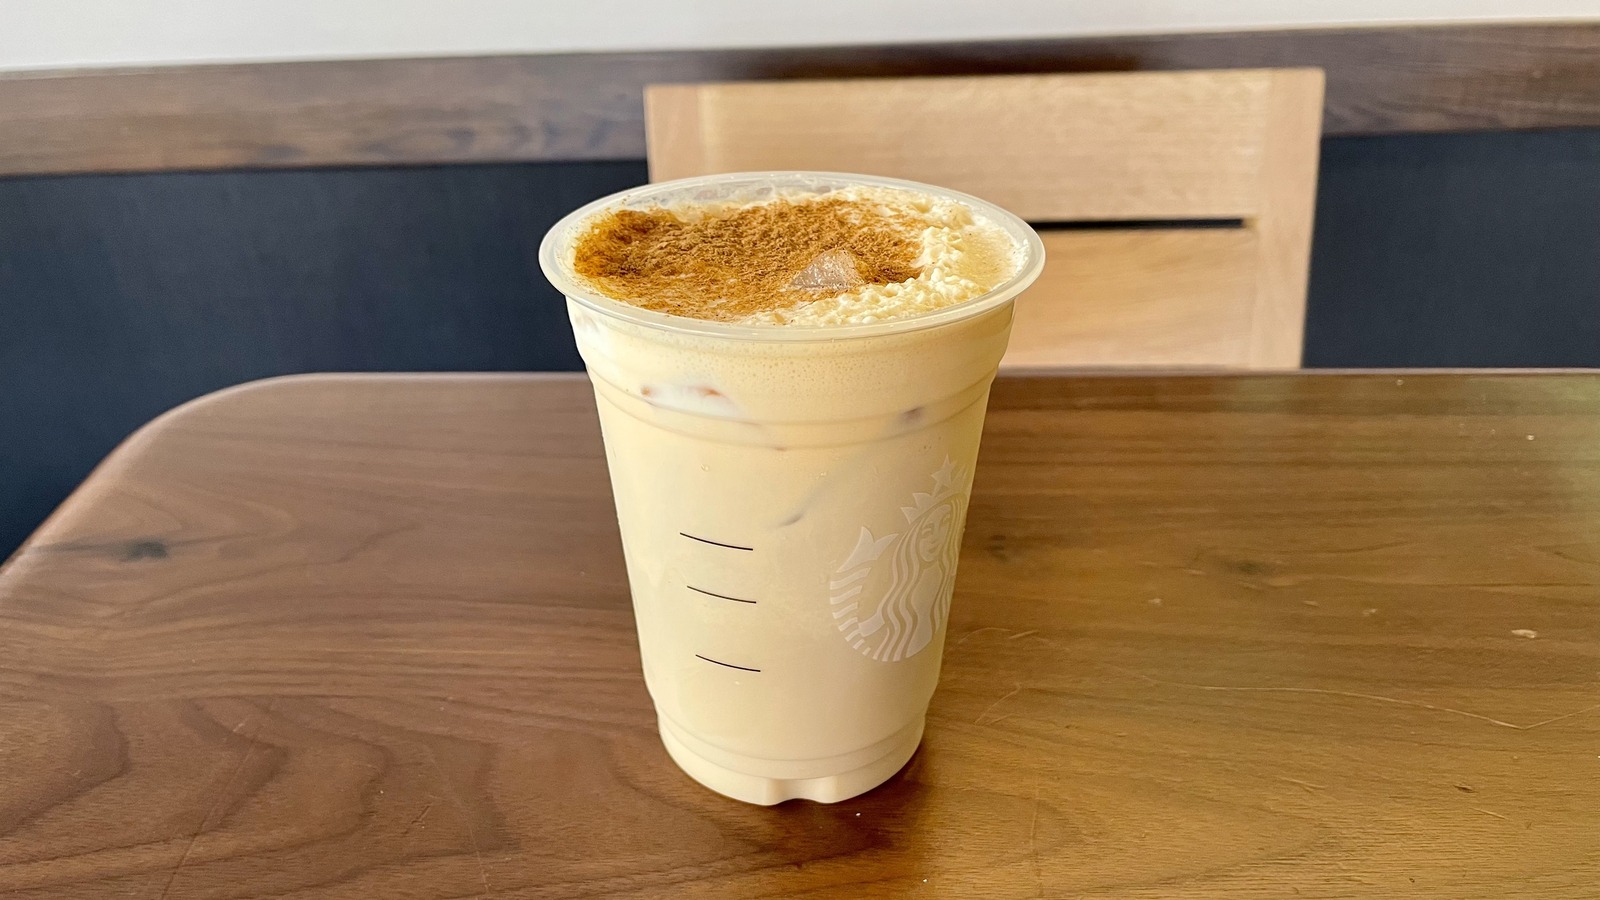 https://www.mashed.com/img/gallery/starbucks-iced-pumpkin-cream-chai-tea-latte-review-fall-is-creamy-and-dreamy/l-intro-1693072945.jpg